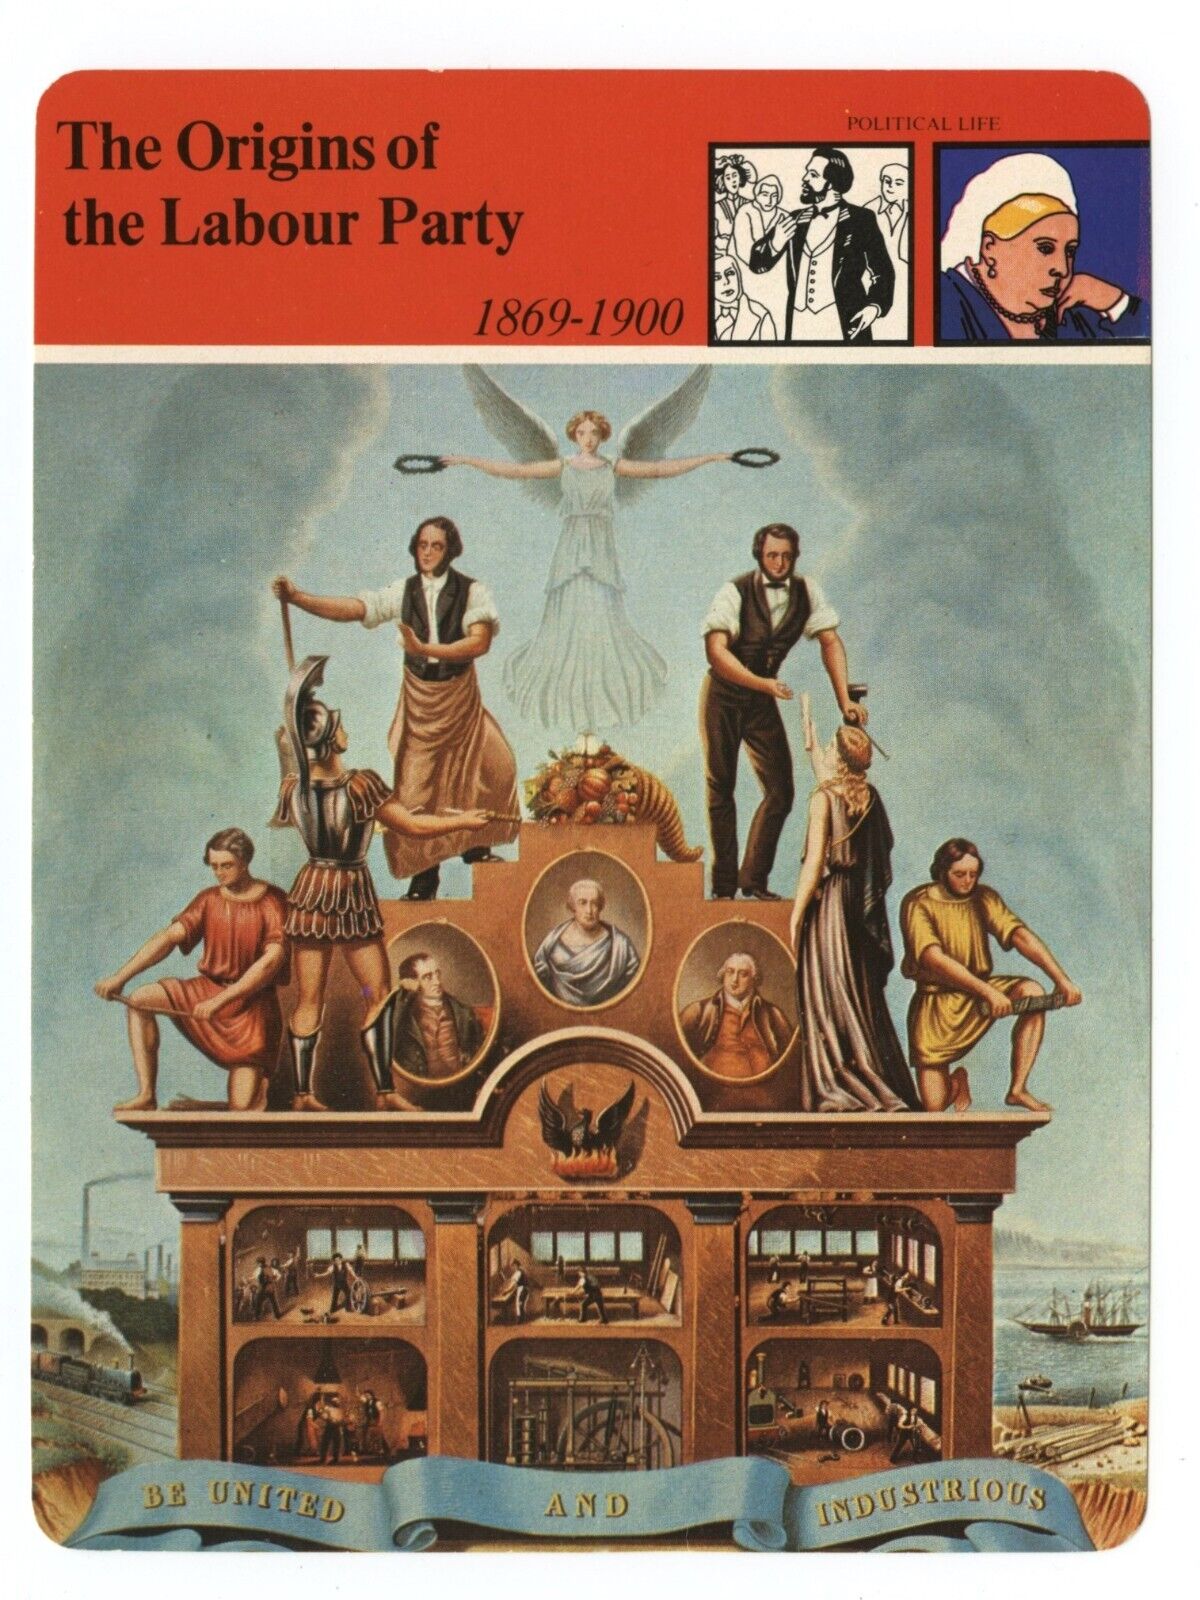 Origins of the Labour Party - Political Life Edito Service British Heritage Card